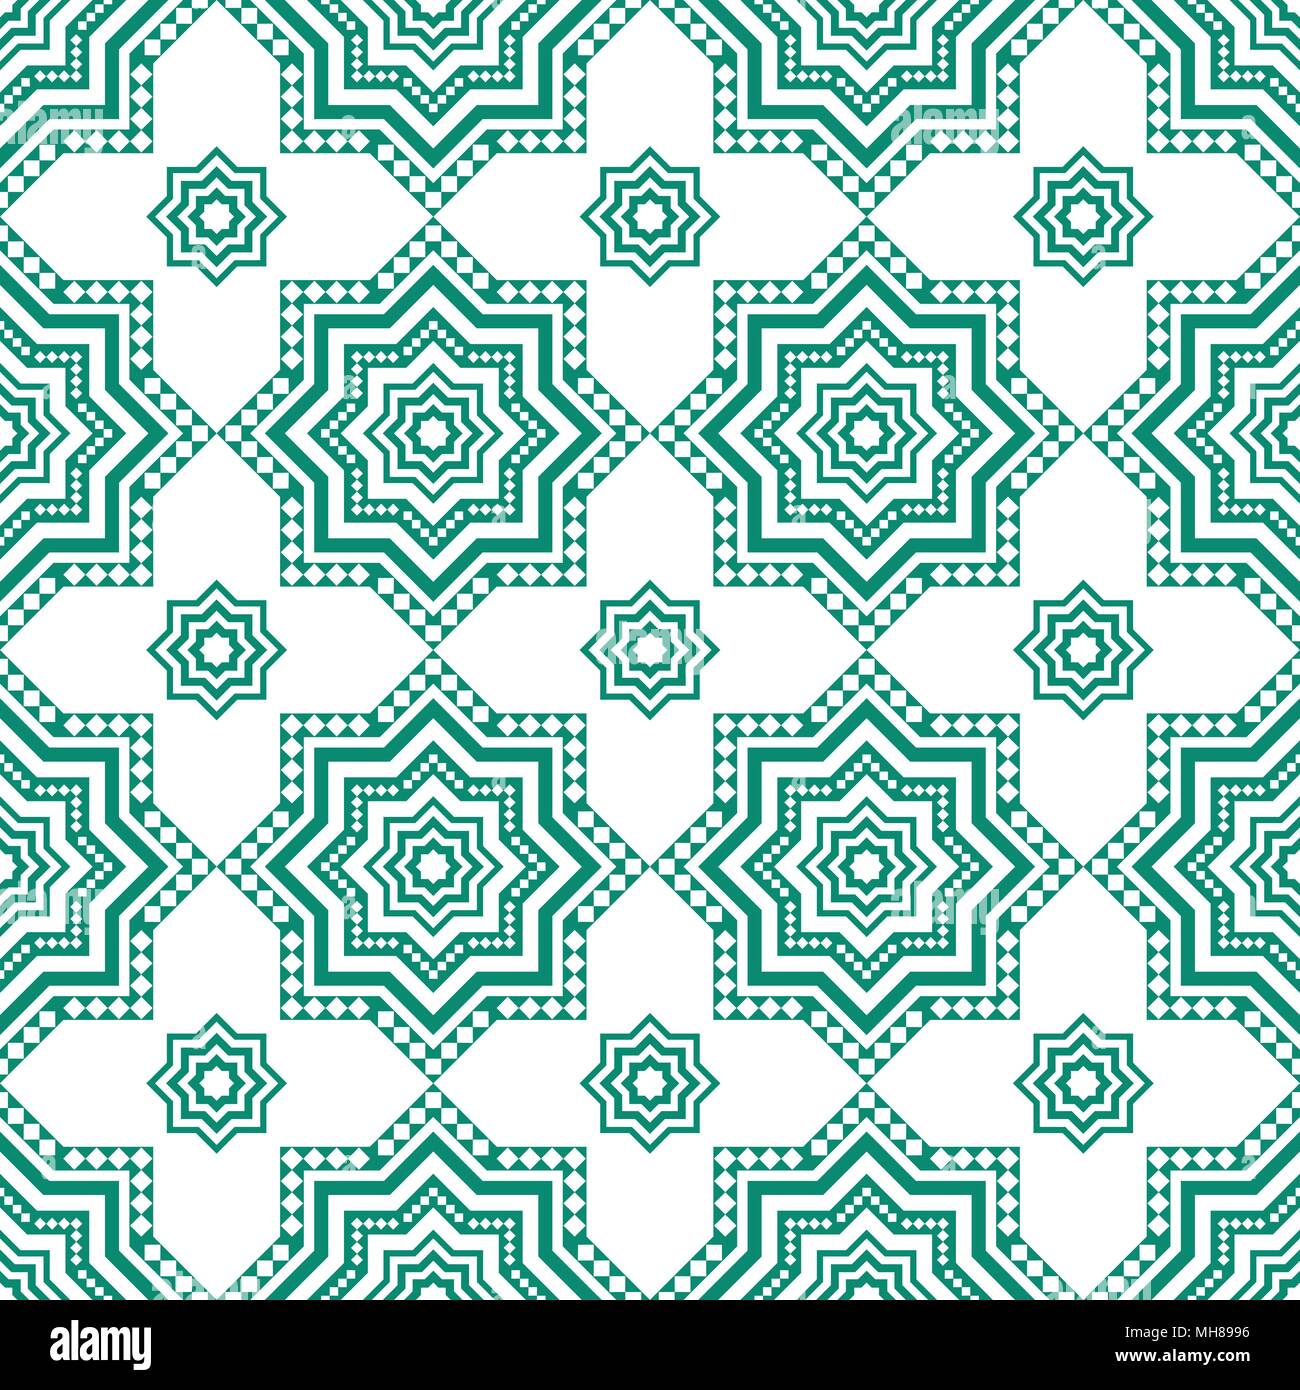 Decorative arabian pattern, green seamless arabic texture, abstract geometrical national background. Stock Vector